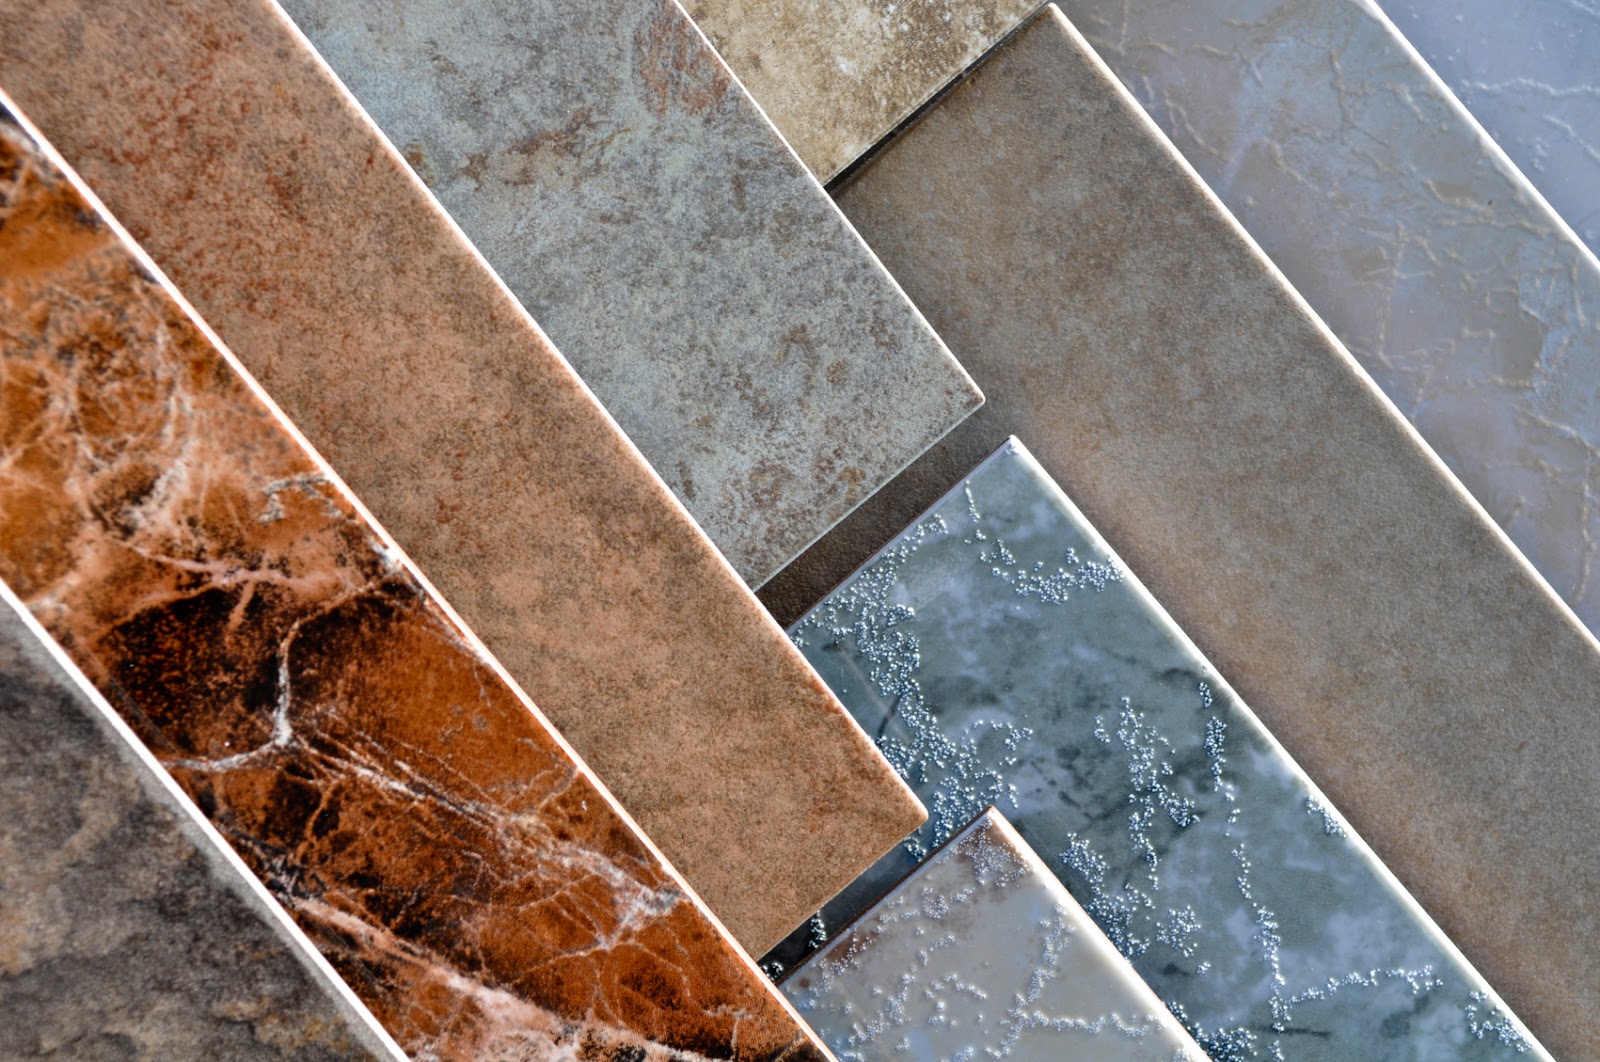 Europe Ceramic Tiles Market Report 2021-26: Trends, Share, Size, Growth, Opportunity And Forecast